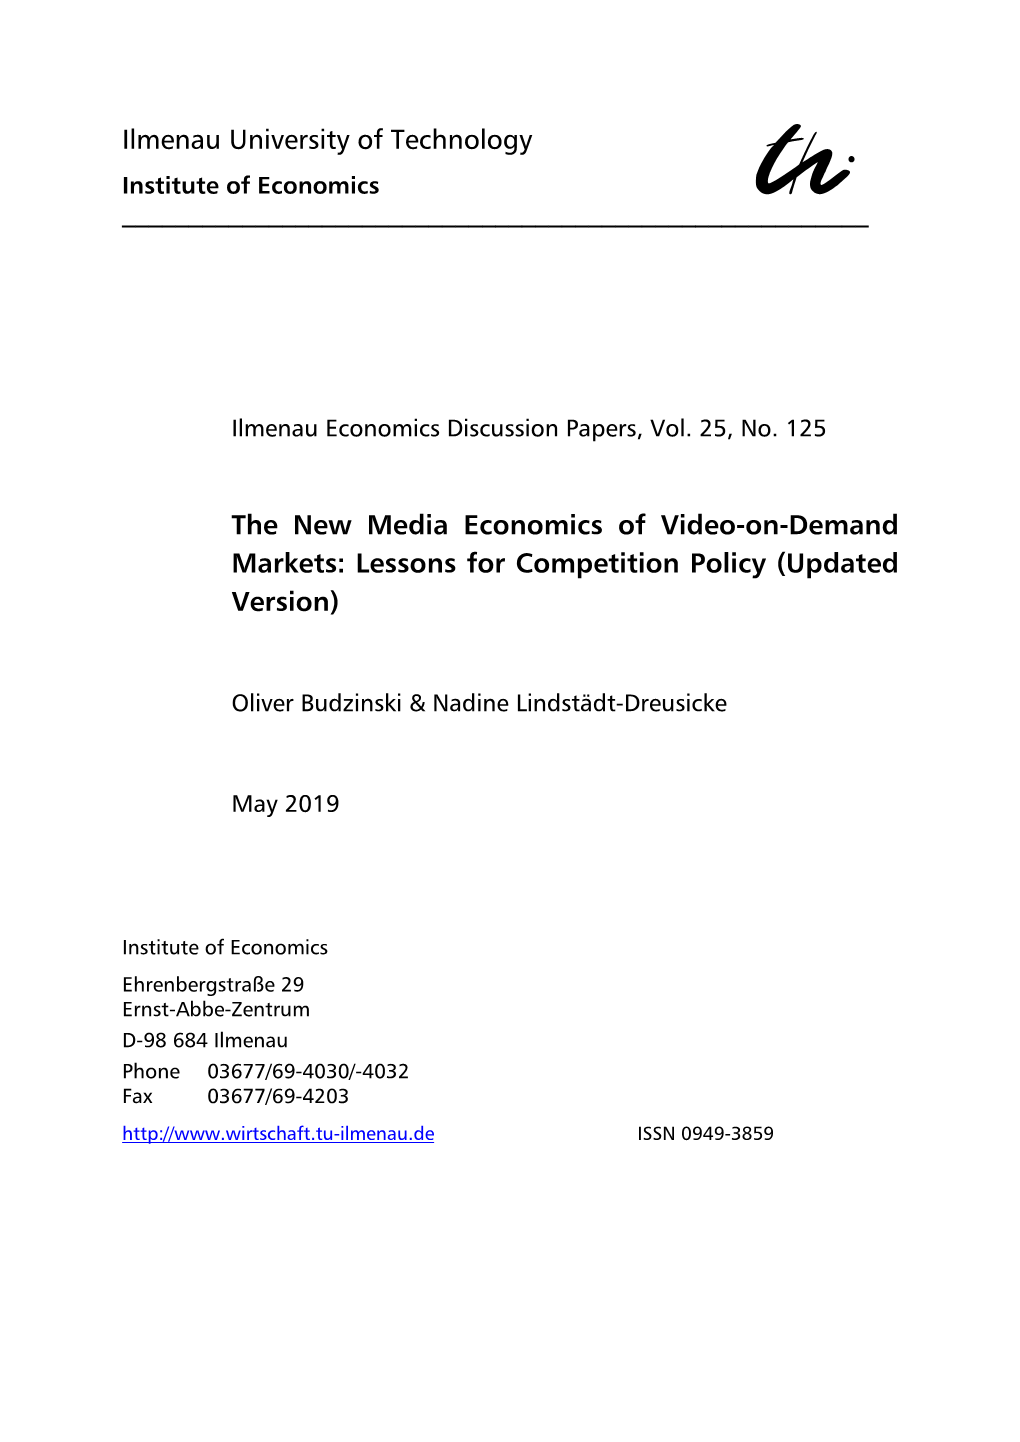 The New Media Economics of Video-On-Demand Markets: Lessons for Competition Policy (Updated Version)